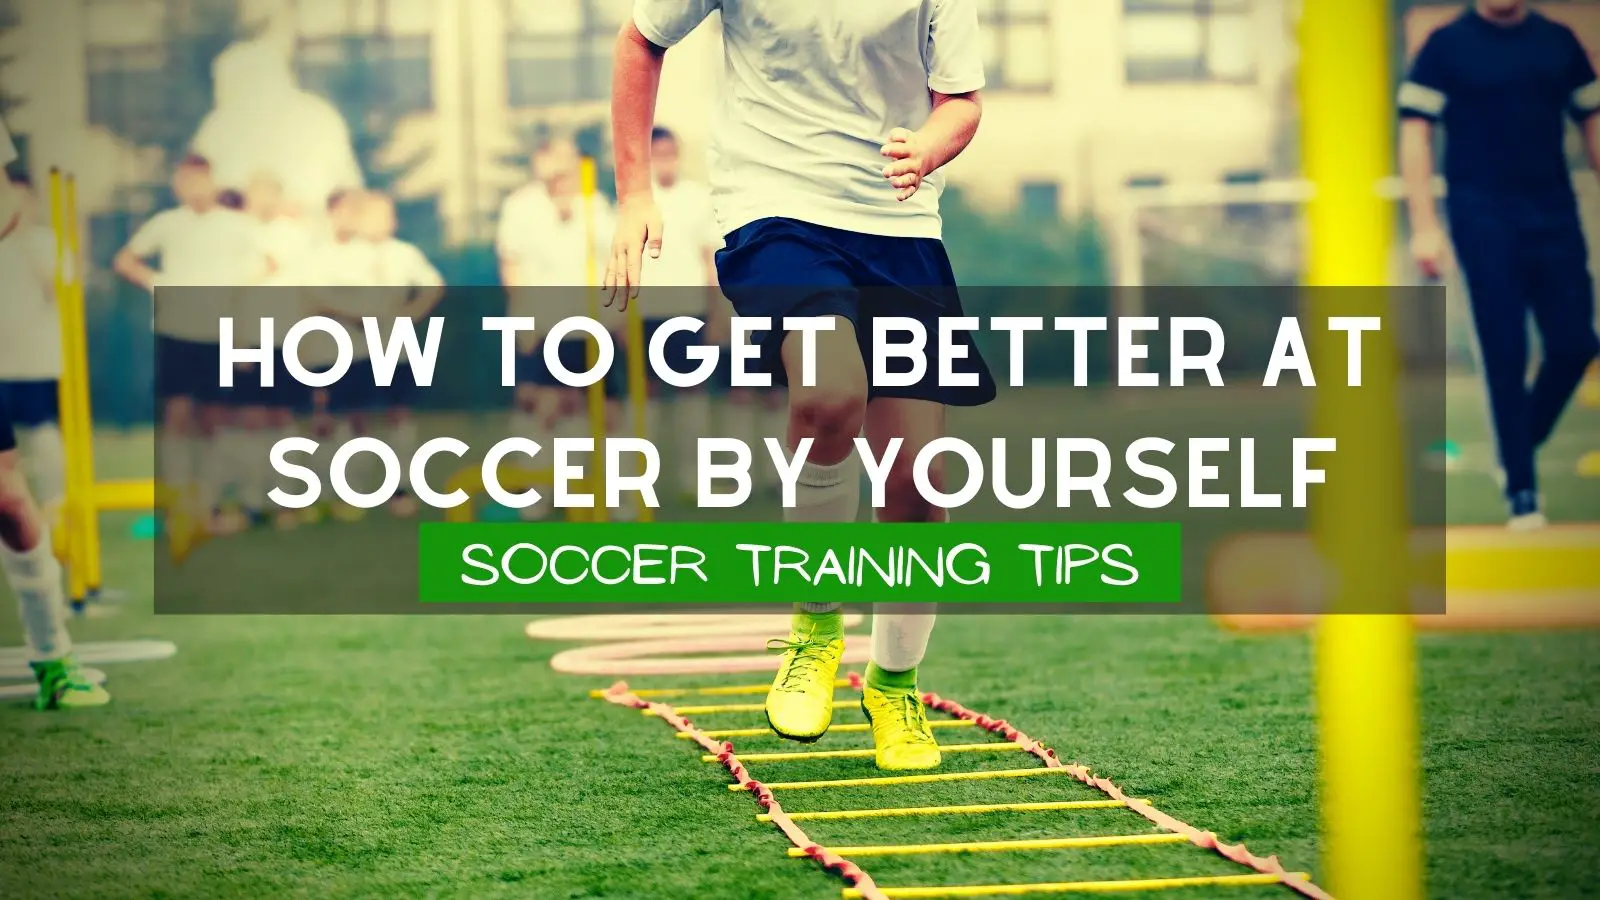 How To Get Better At Soccer By Yourself Soccer Training Tips